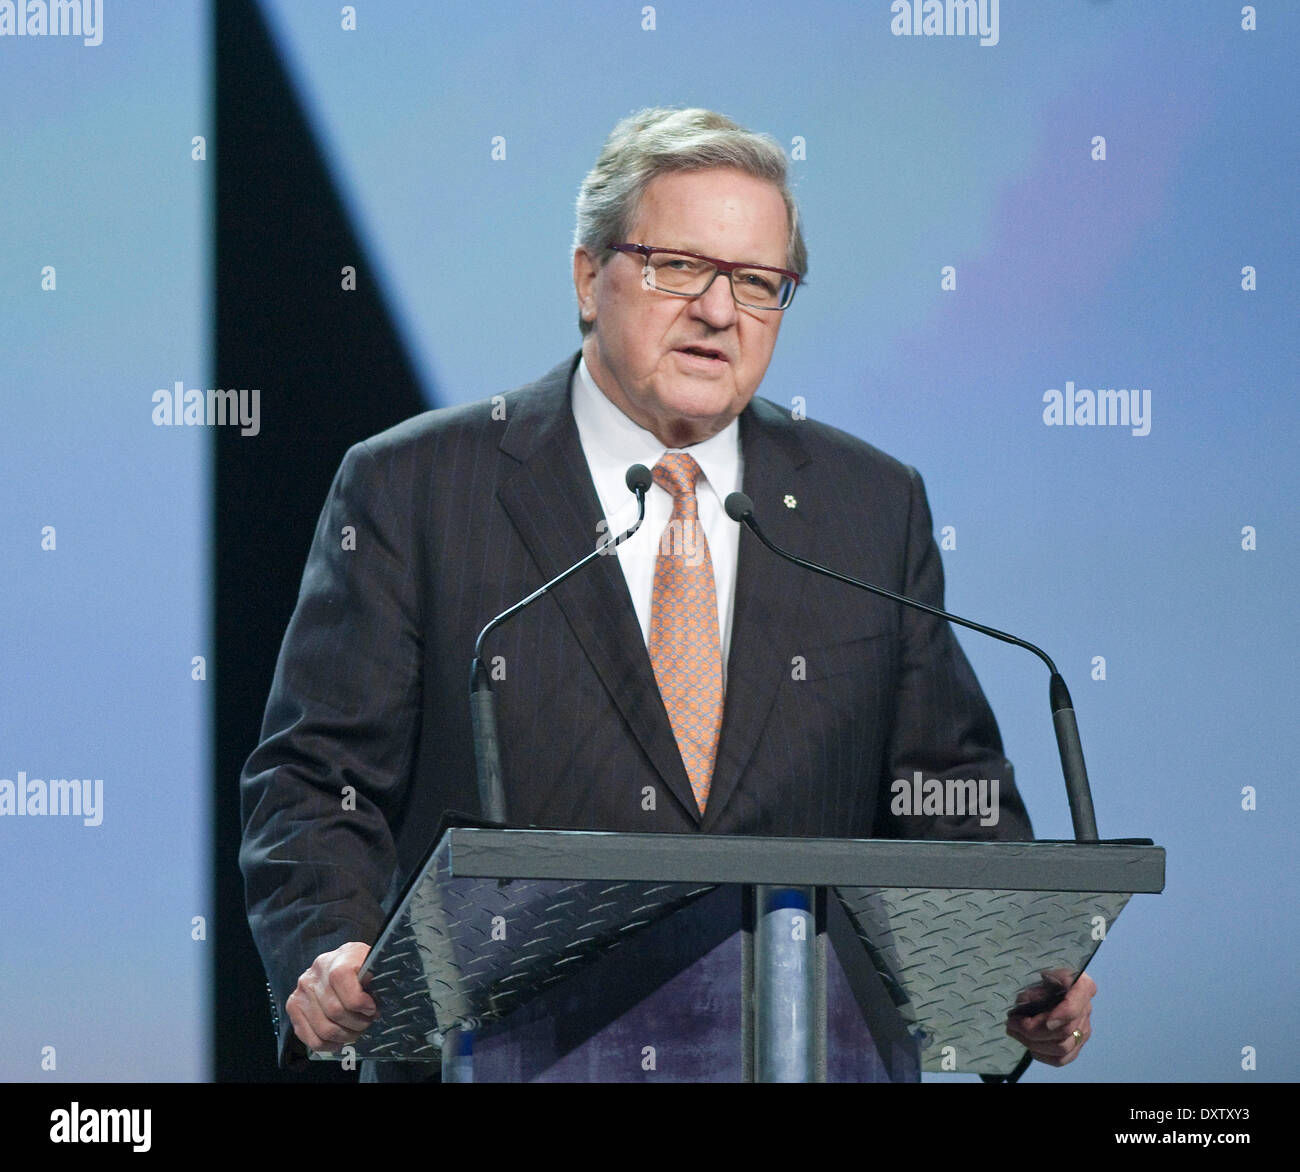 March 29, 2014 - Winnipeg, Manitoba, Canada - Former federal cabinet minister LLOYD AXWORTHY introduces the Alan Waters Humanitarian Award recipients at the Juno Gala Dinner & Awards during the 2014 Juno Awards in Winnipeg, Manitoba, March 29, 2014. (Credit Image: © Heinz Ruckemann/ZUMAPRESS.com) Stock Photo